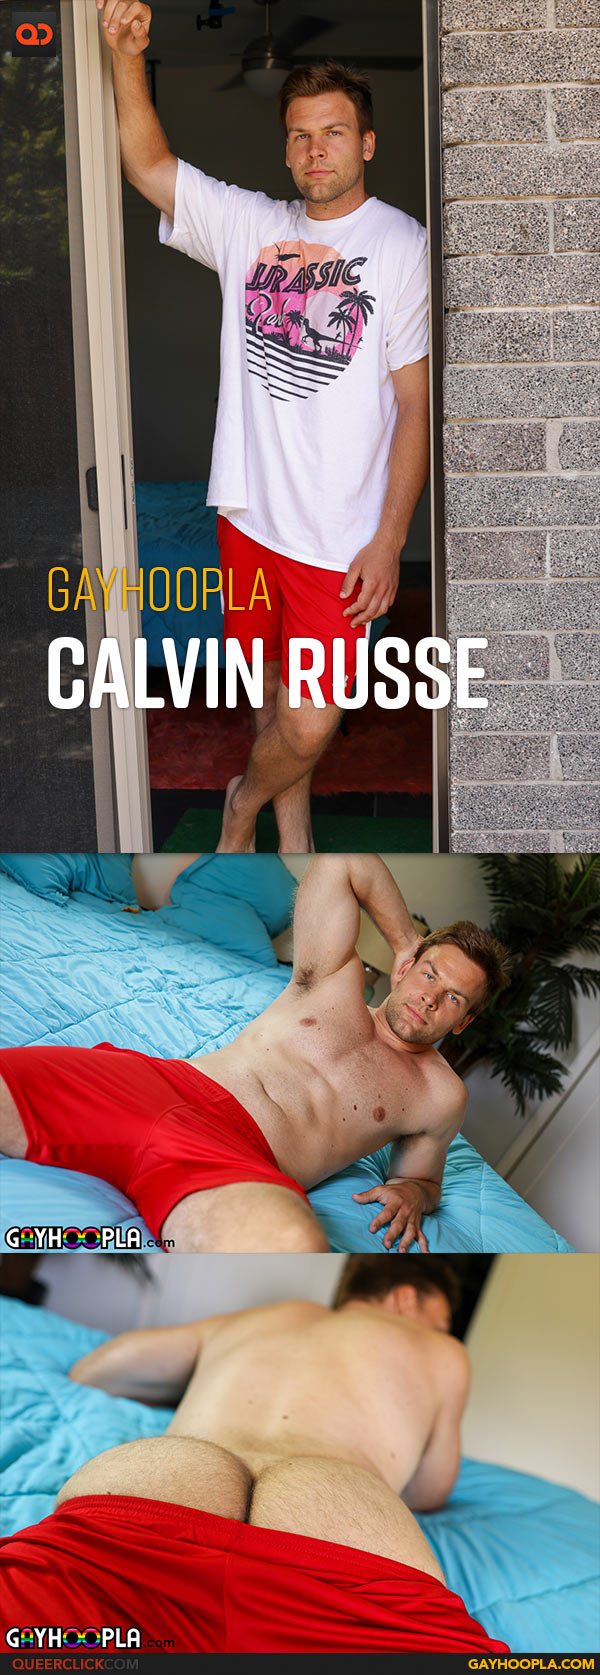 Gayhoopla: Calvin Russe - Calvin Impresses With His Piercing Green Eyes, Movie Star Smile and Uncut Cock